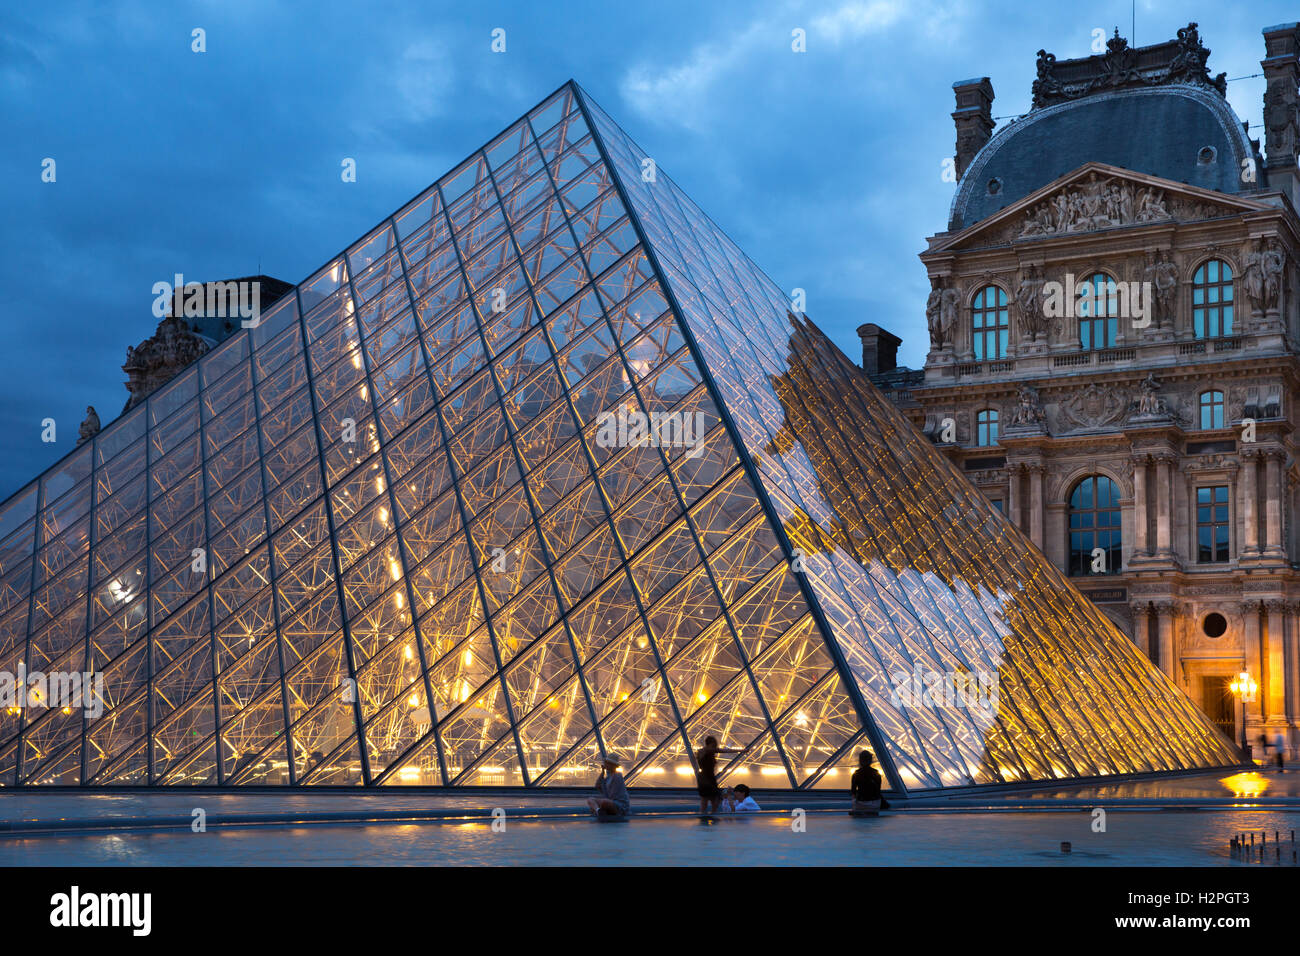 The main (Pyramid) entrance of the Louvre, Paris, France. Stock Photo